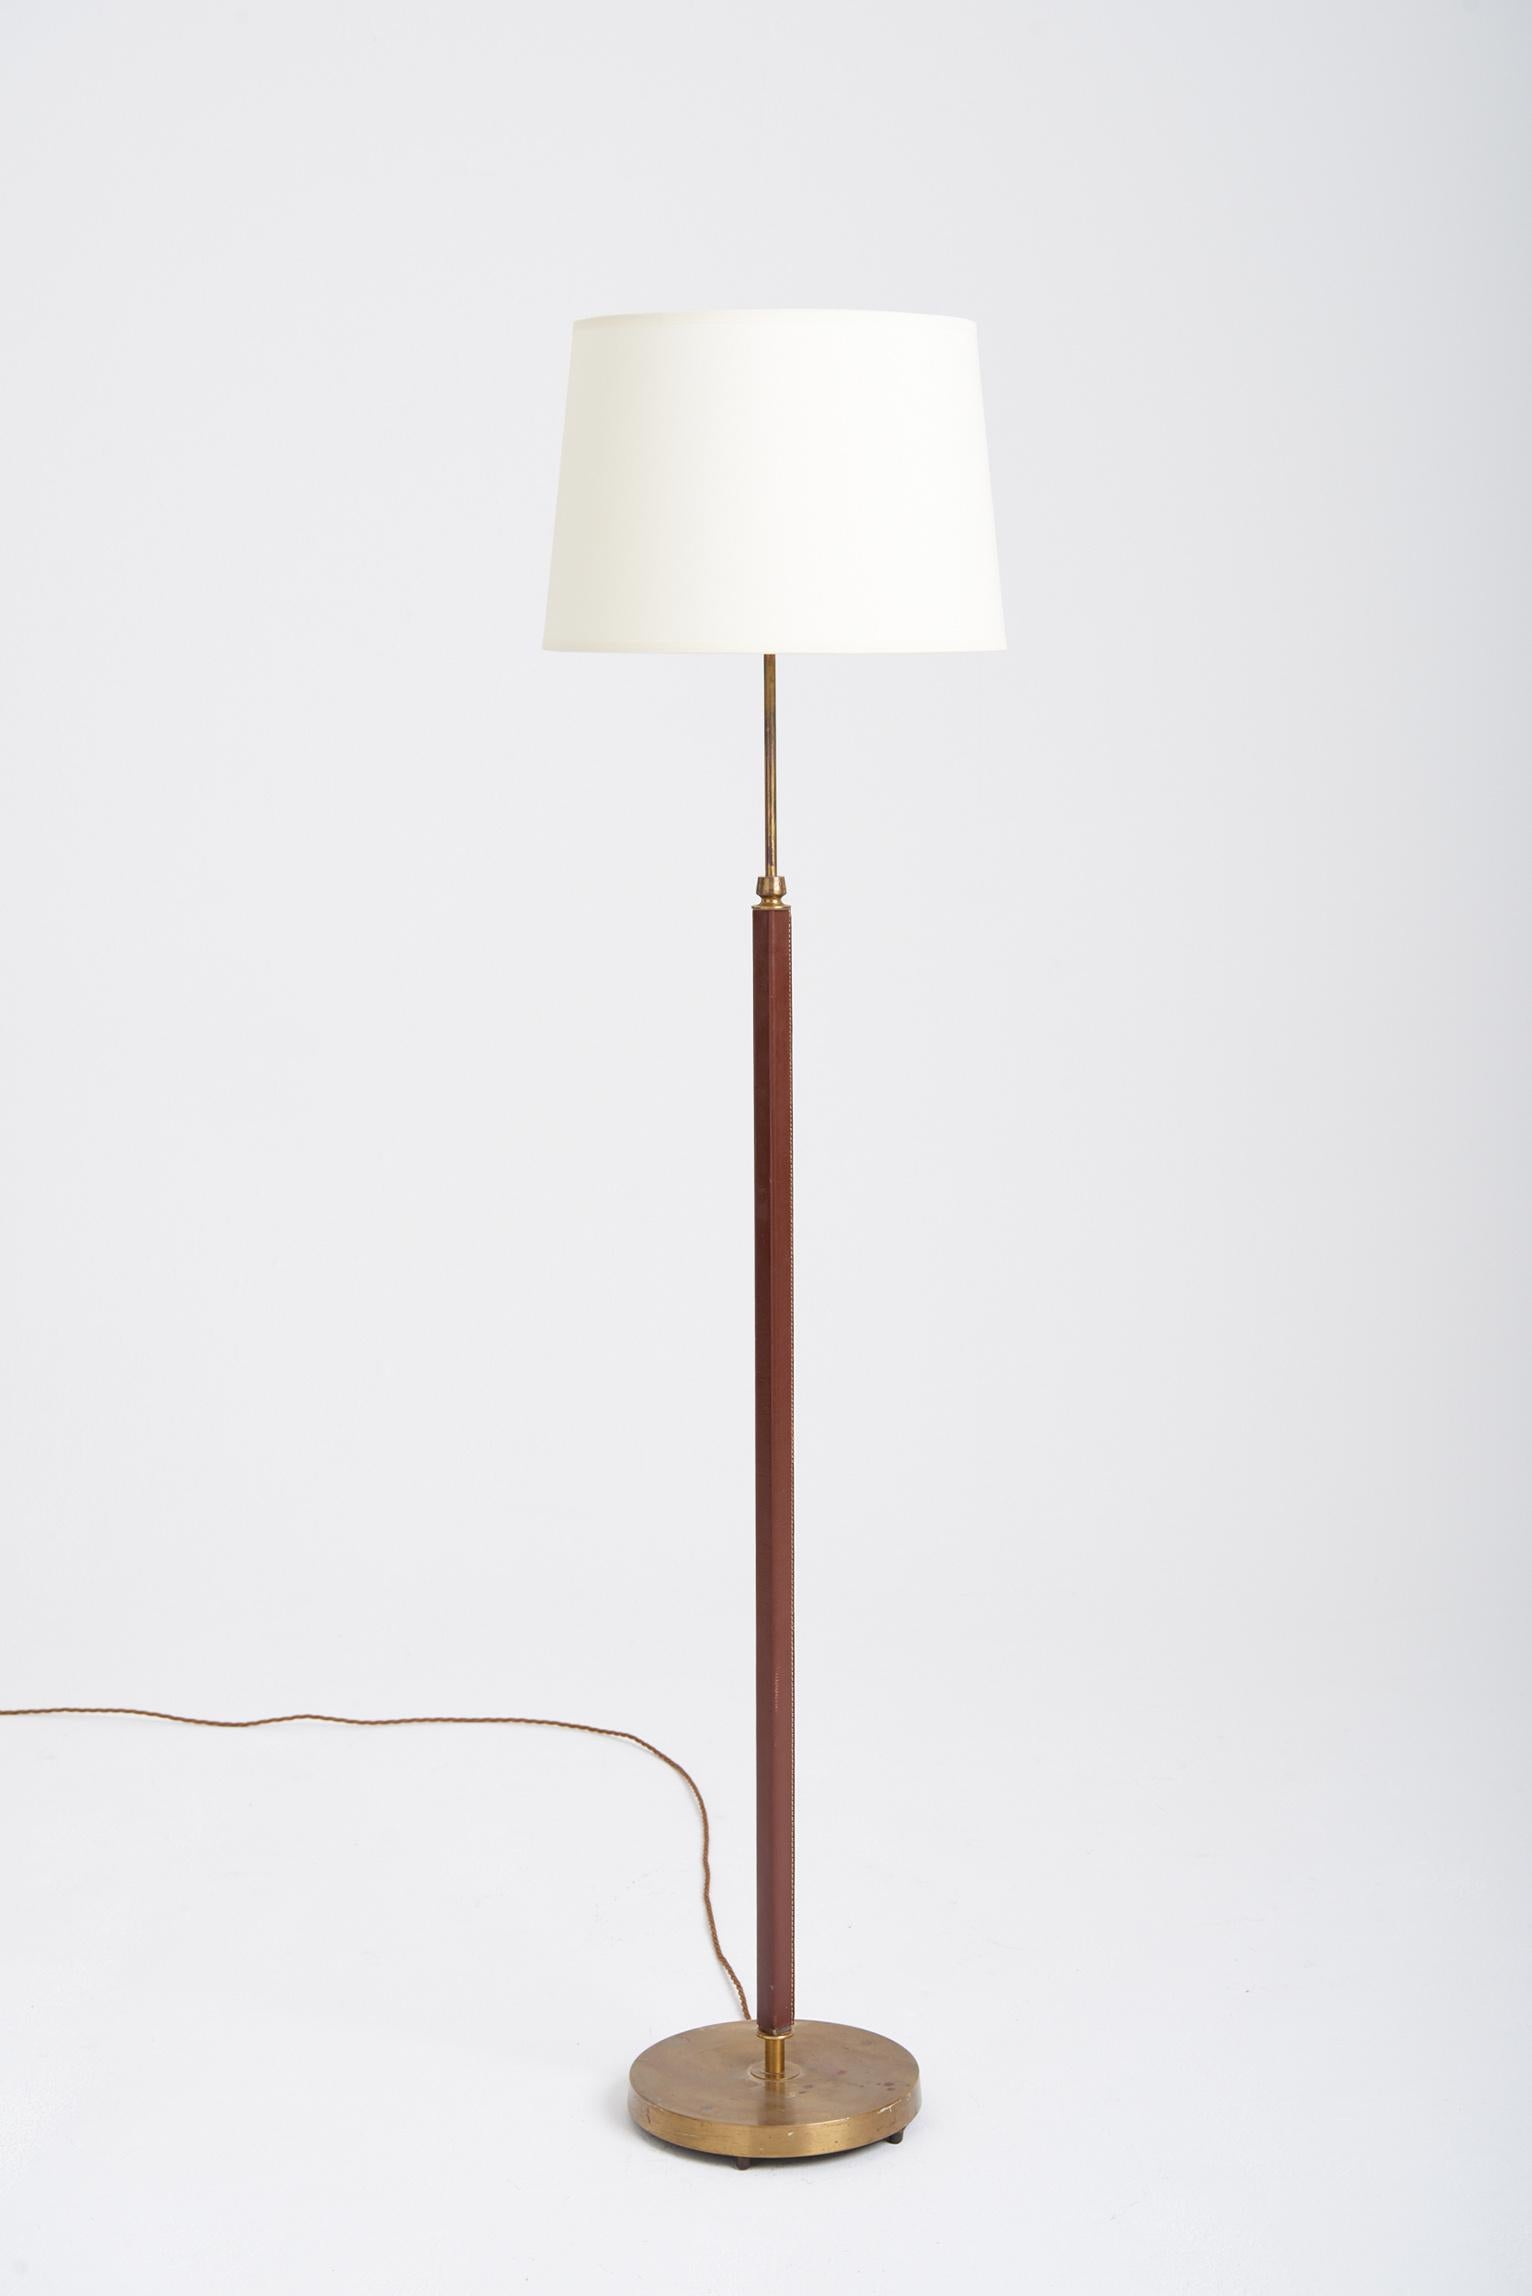 A brass and brown leather floor lamp, by Falkenbergs Belysning.
Sweden, circa 1950-1970.
Including the shade 141 cm high by 36 cm diameter.
Base only 120 cm high by 24 cm diameter.